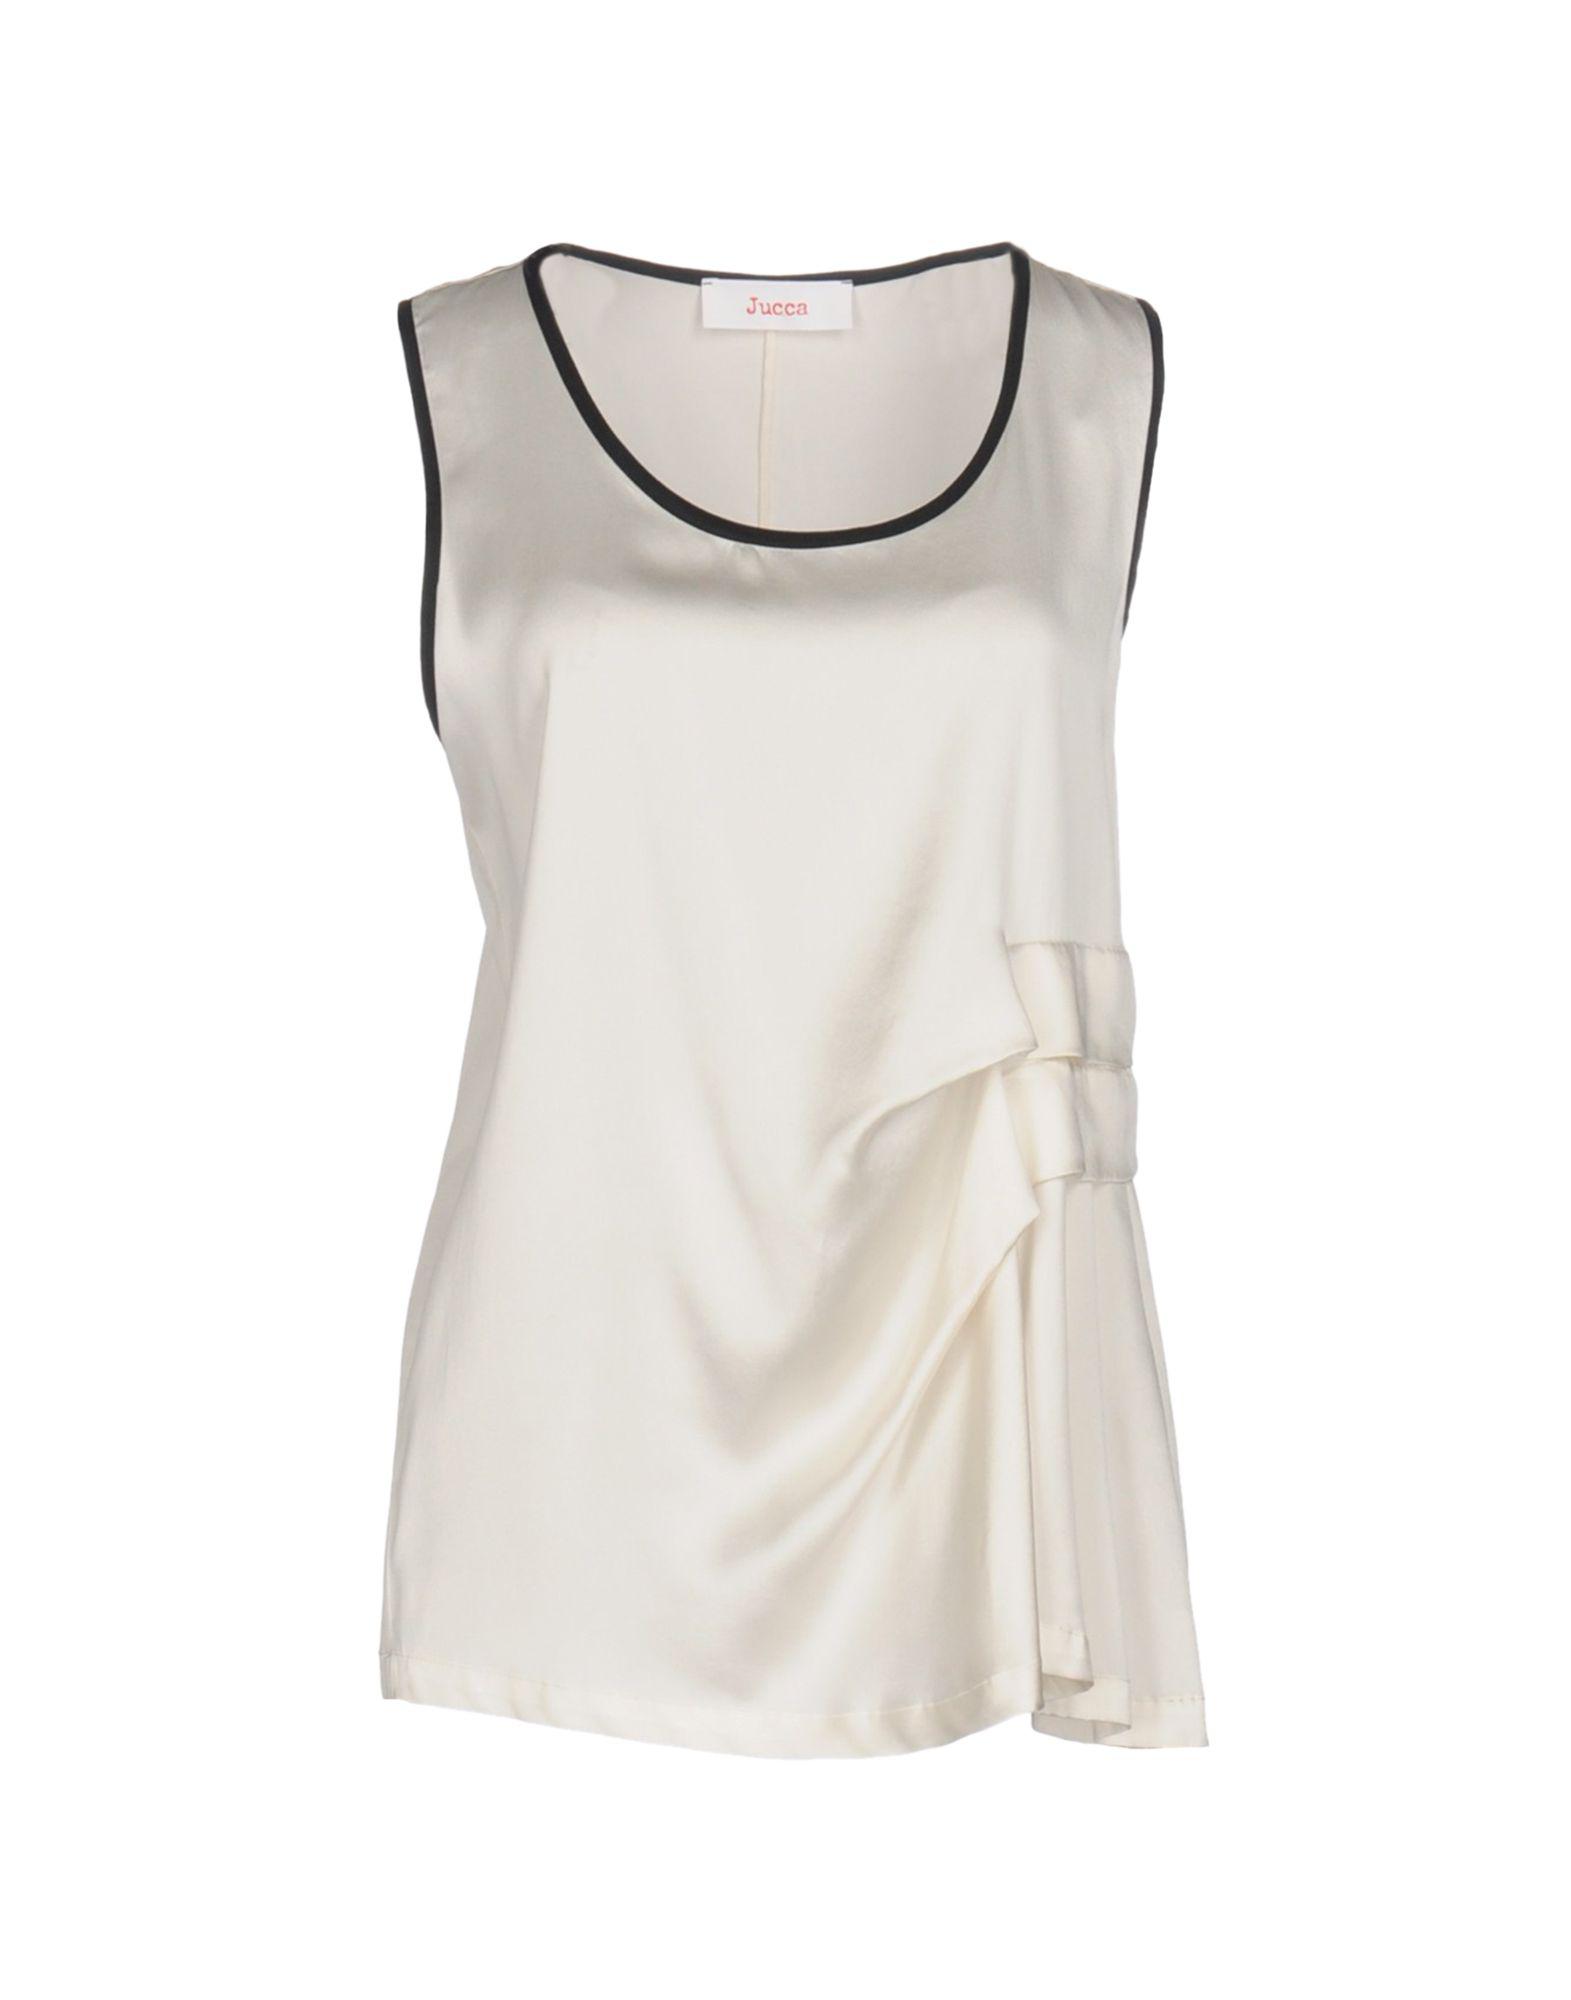 Jucca Satin Top in Ivory (White) - Lyst